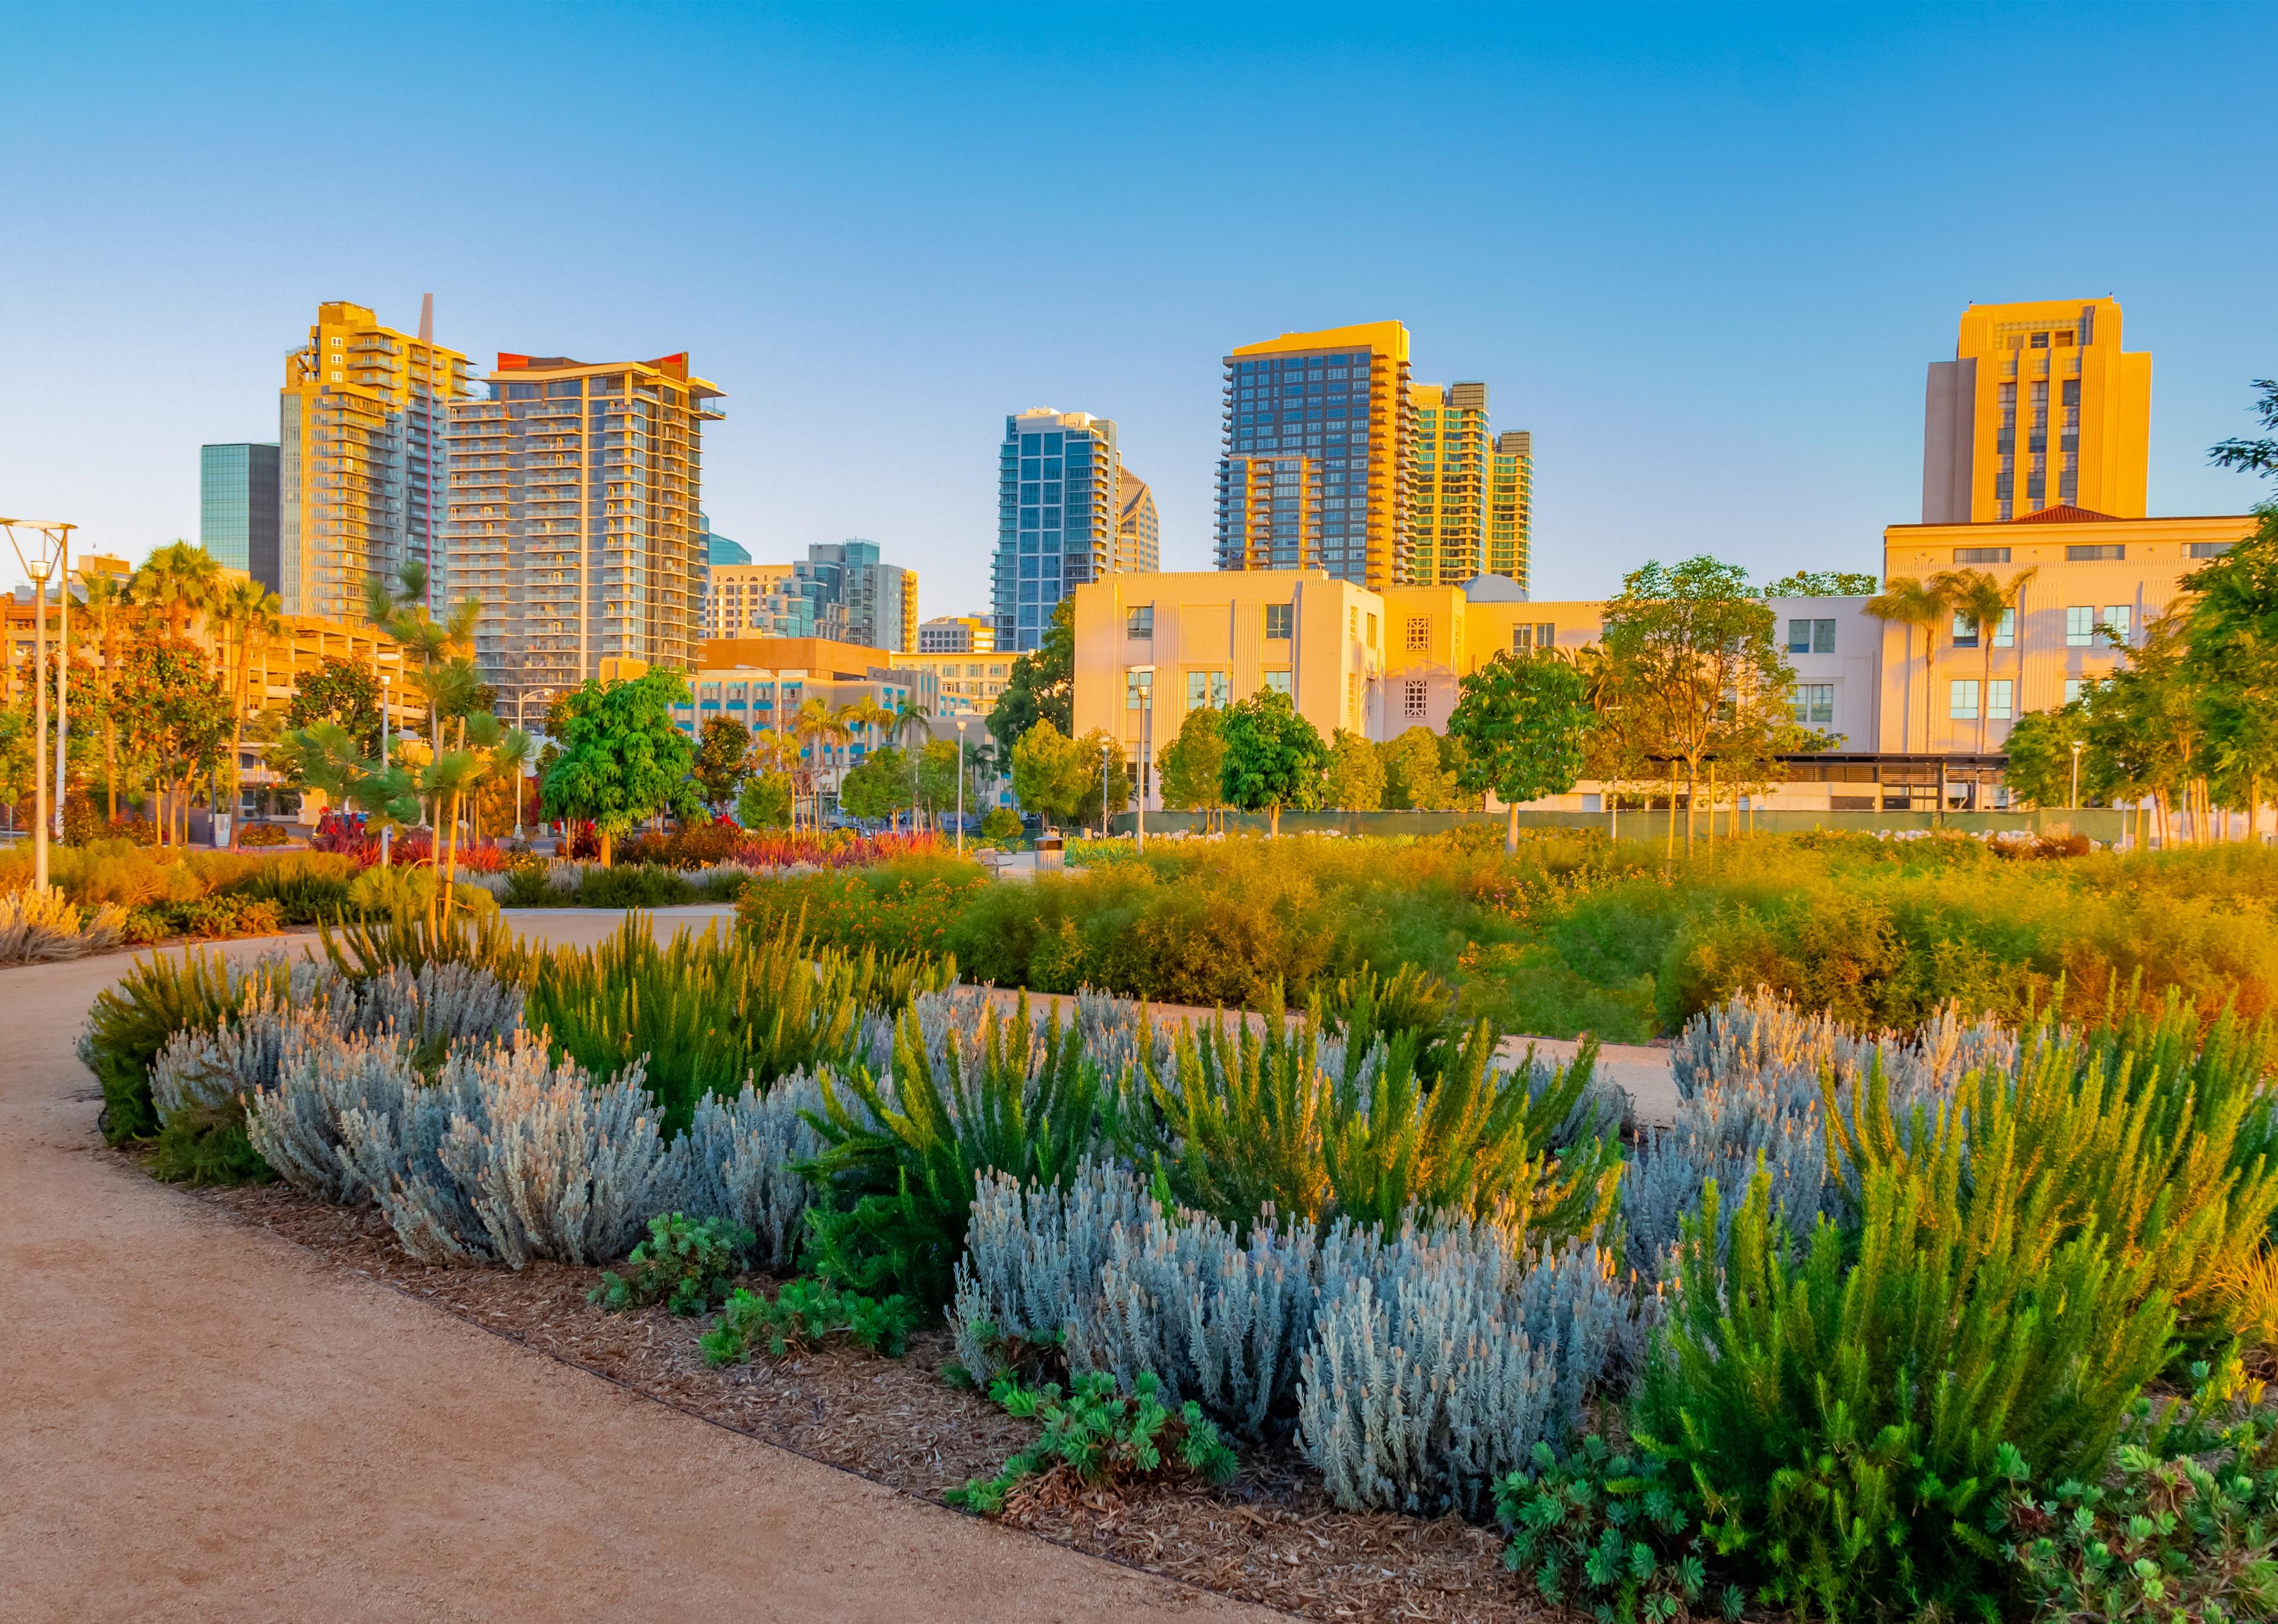 Dusk light hits the garden and skyscrapers of San Diego and the Waterfront Park.